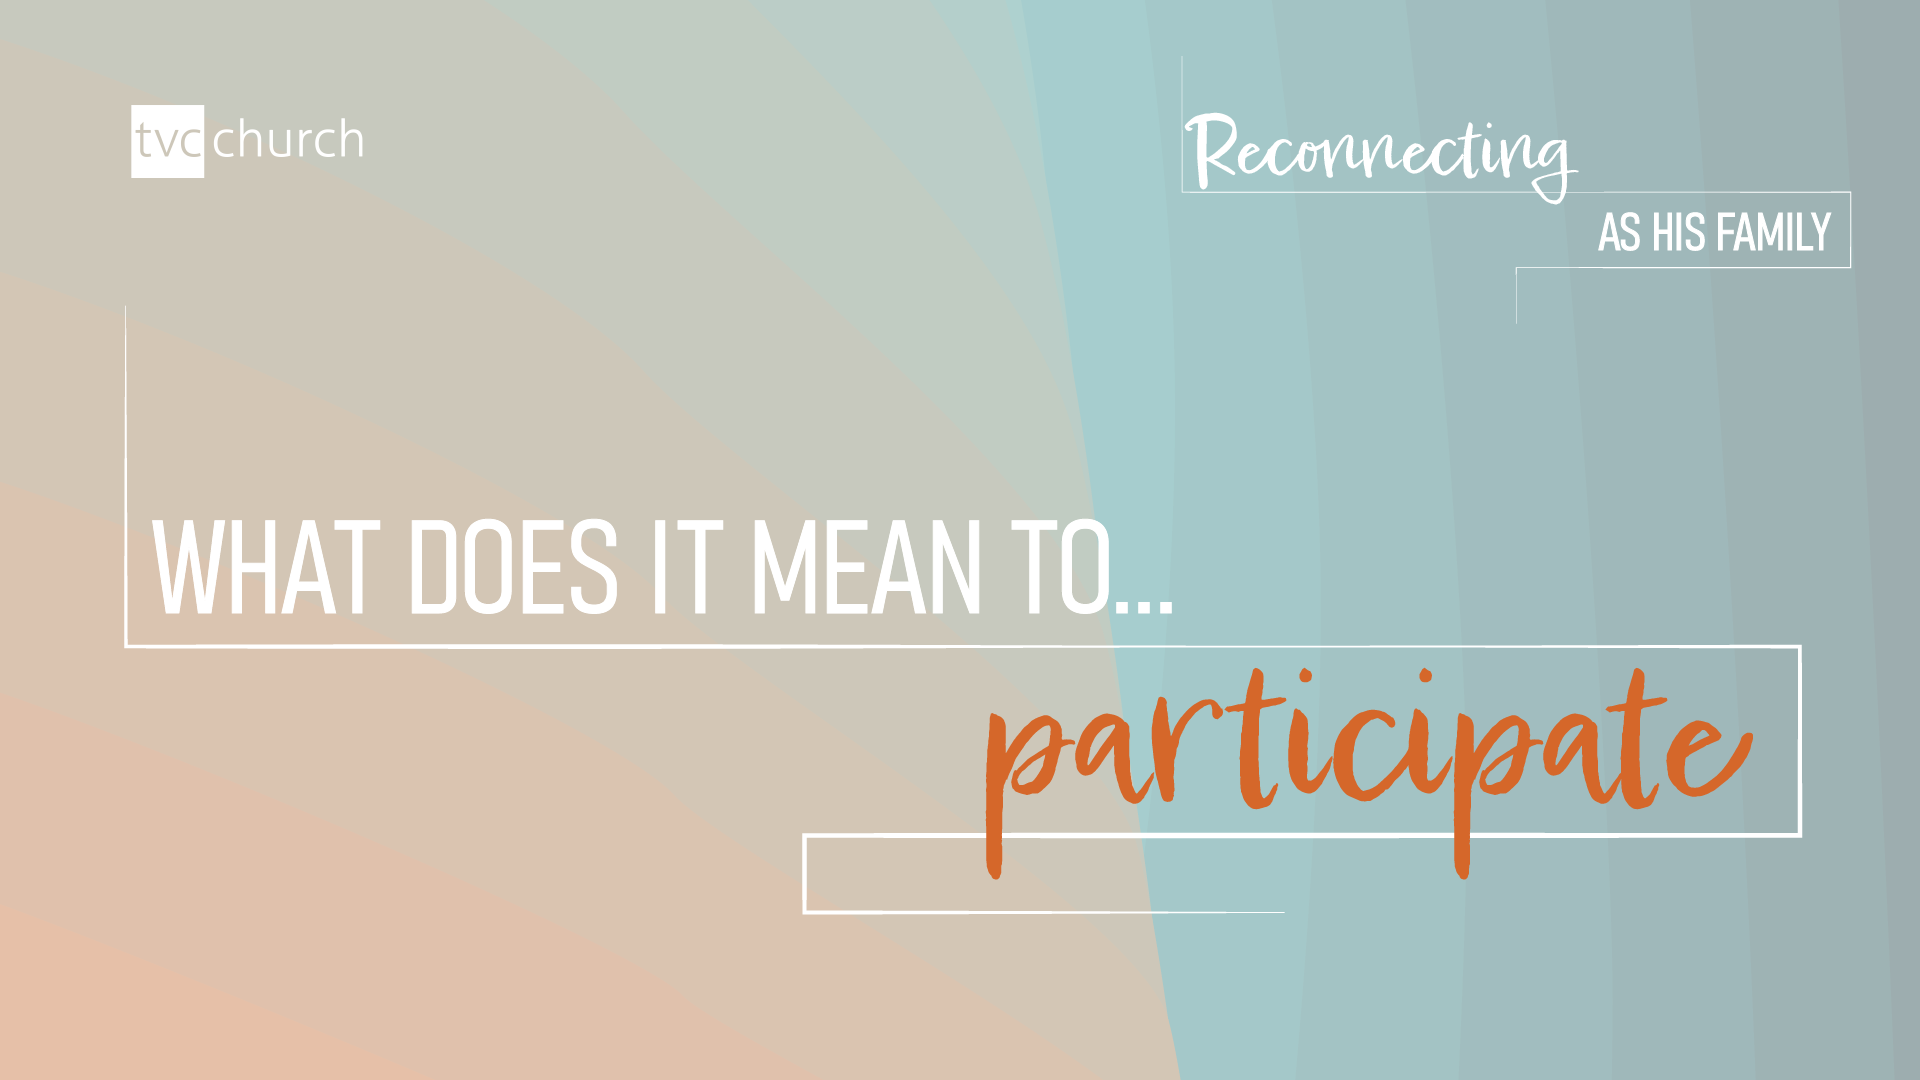 What does it mean to Participate?